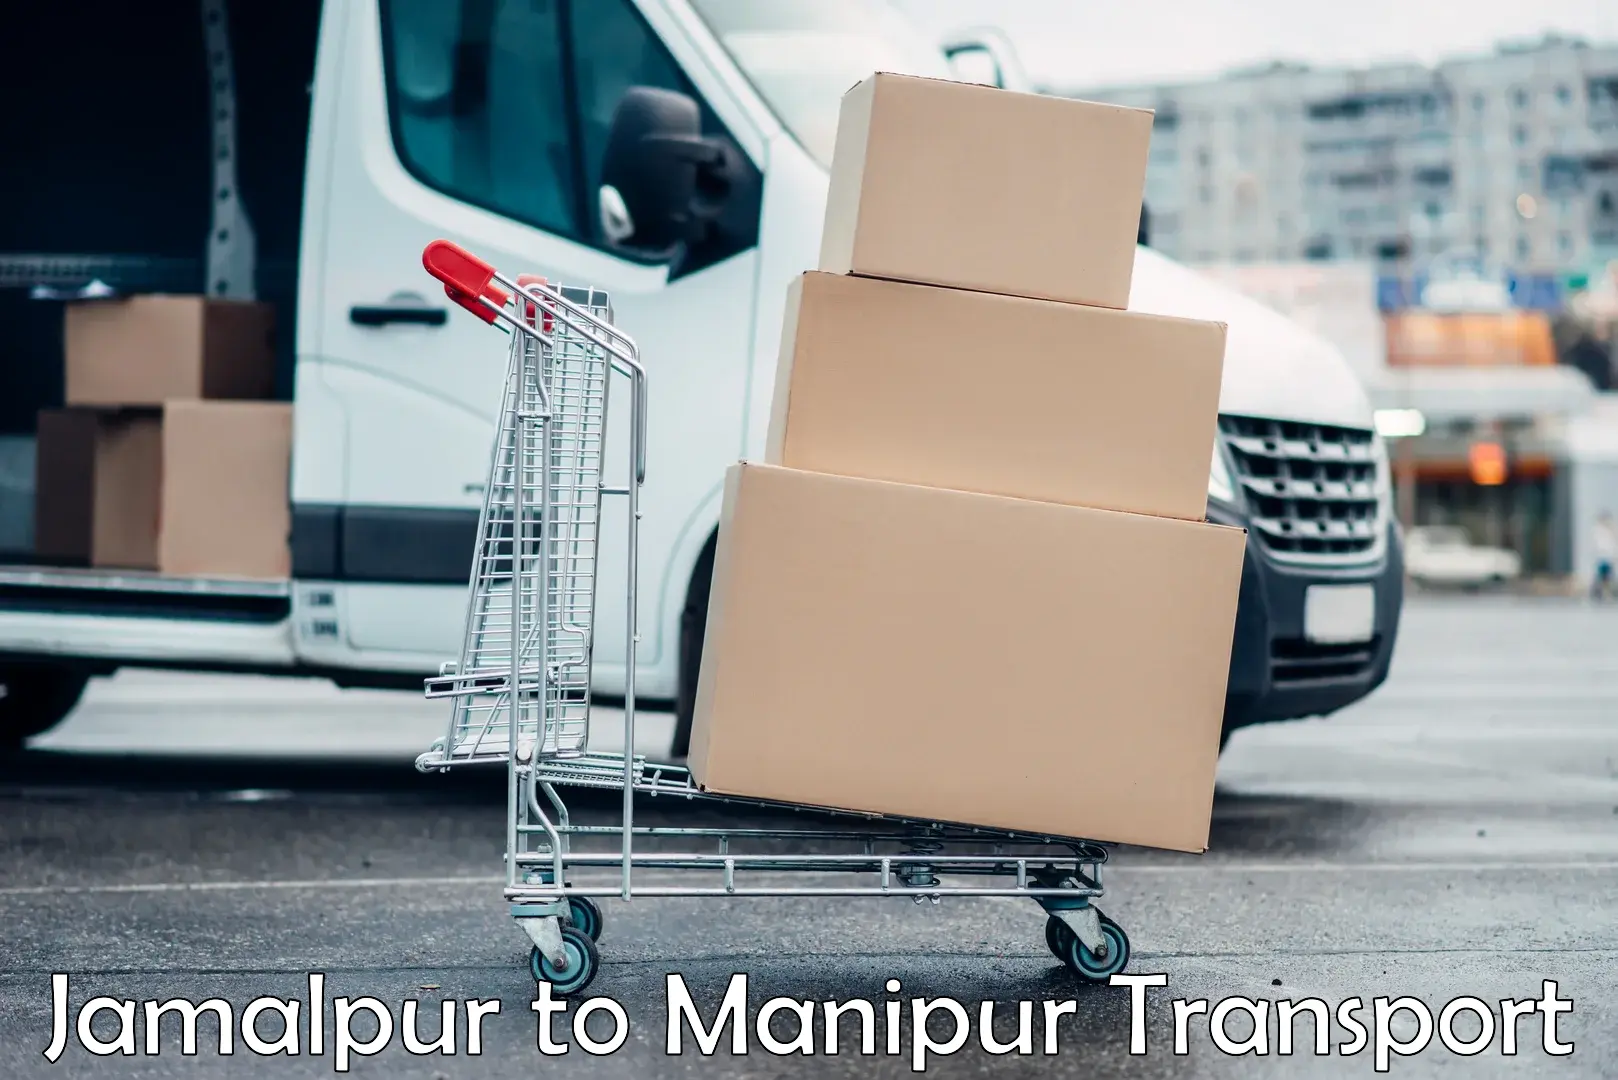 Vehicle transport services in Jamalpur to Imphal